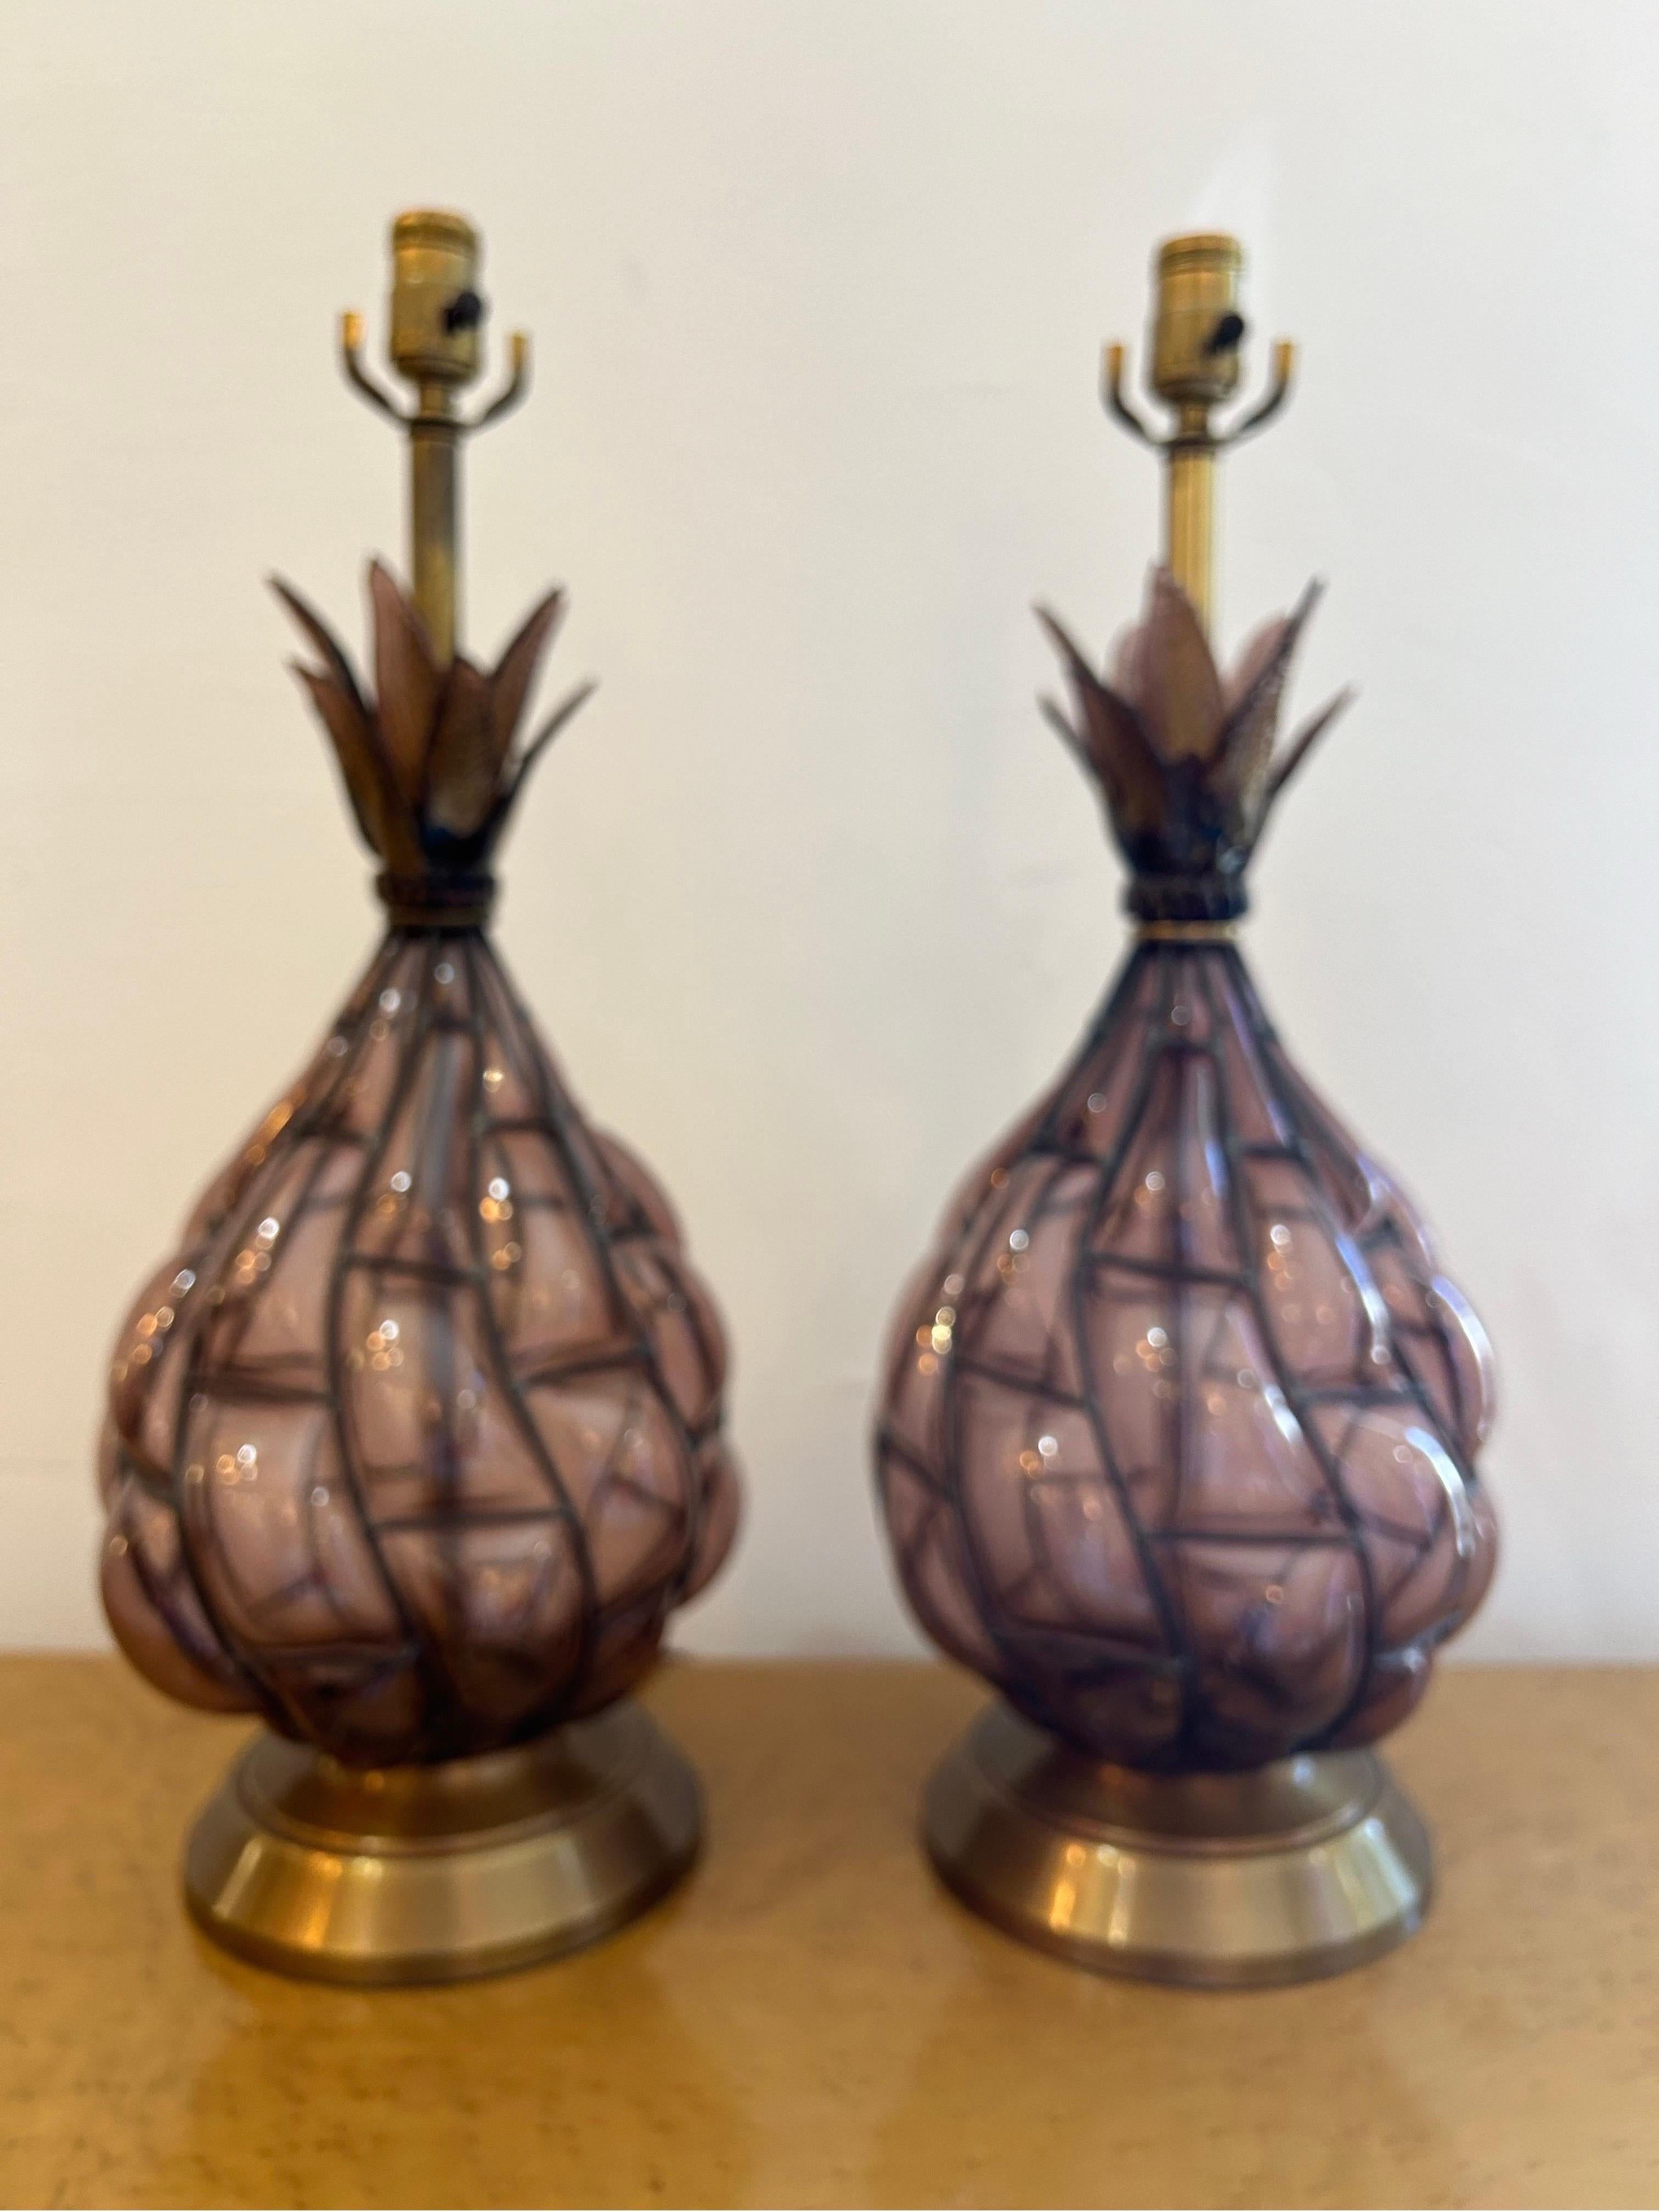 A pair of brilliant Murano amethyst colored glass lamps in a metal framework .hand blown to perfection. Topped with glass pineapple leaves that glitter…